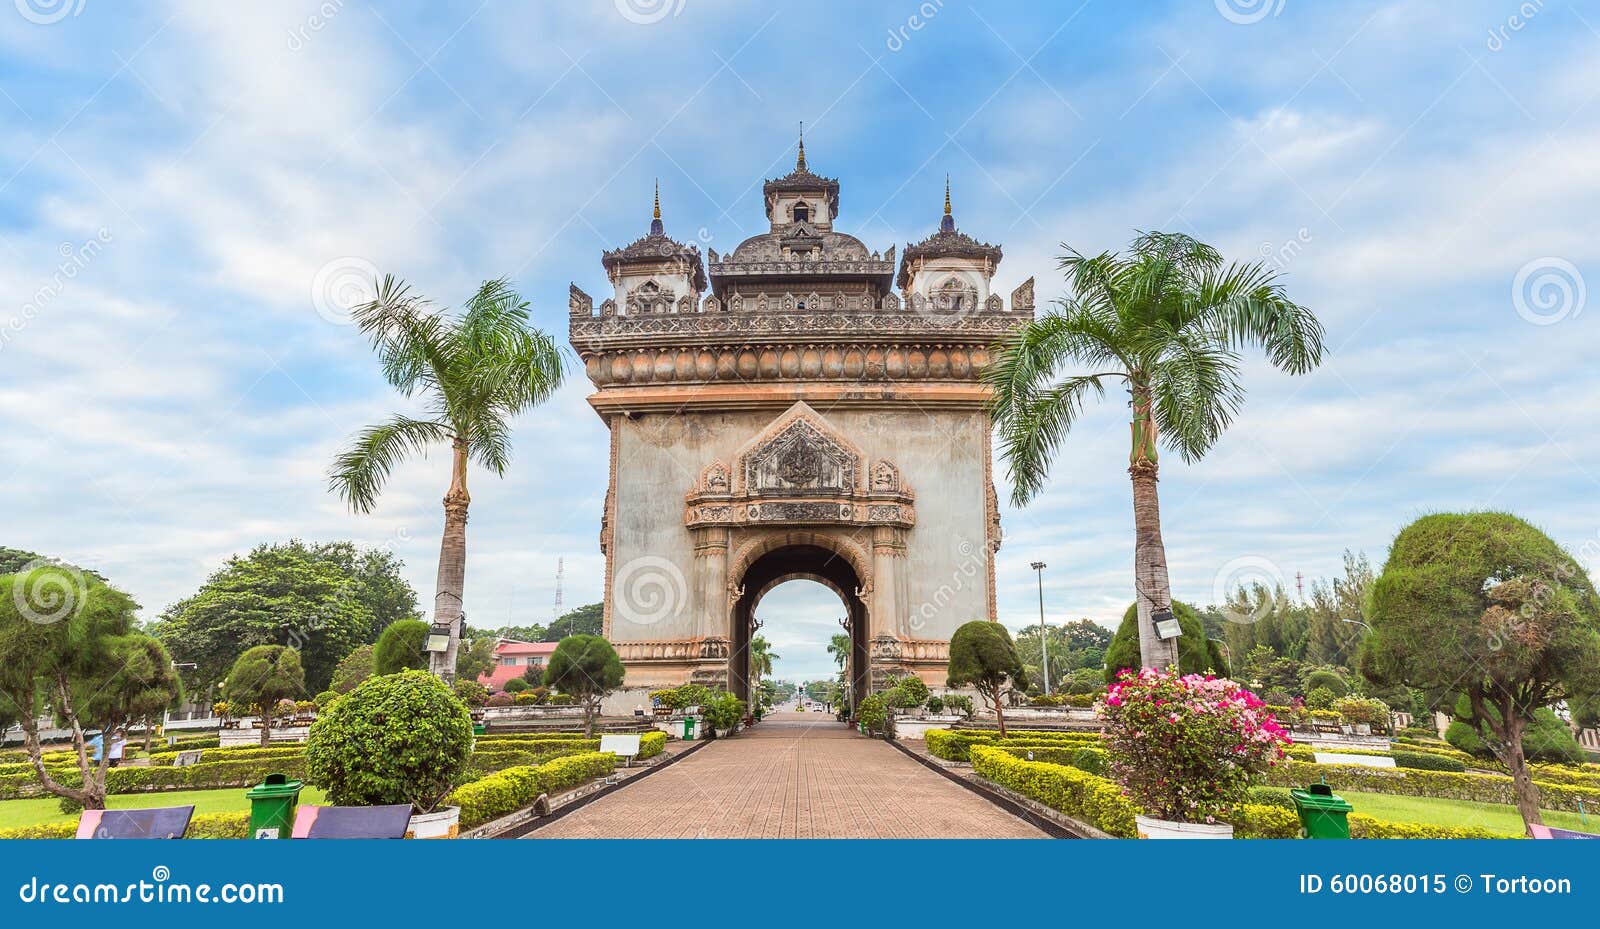 patuxai literally meaning victory gate in vientiane